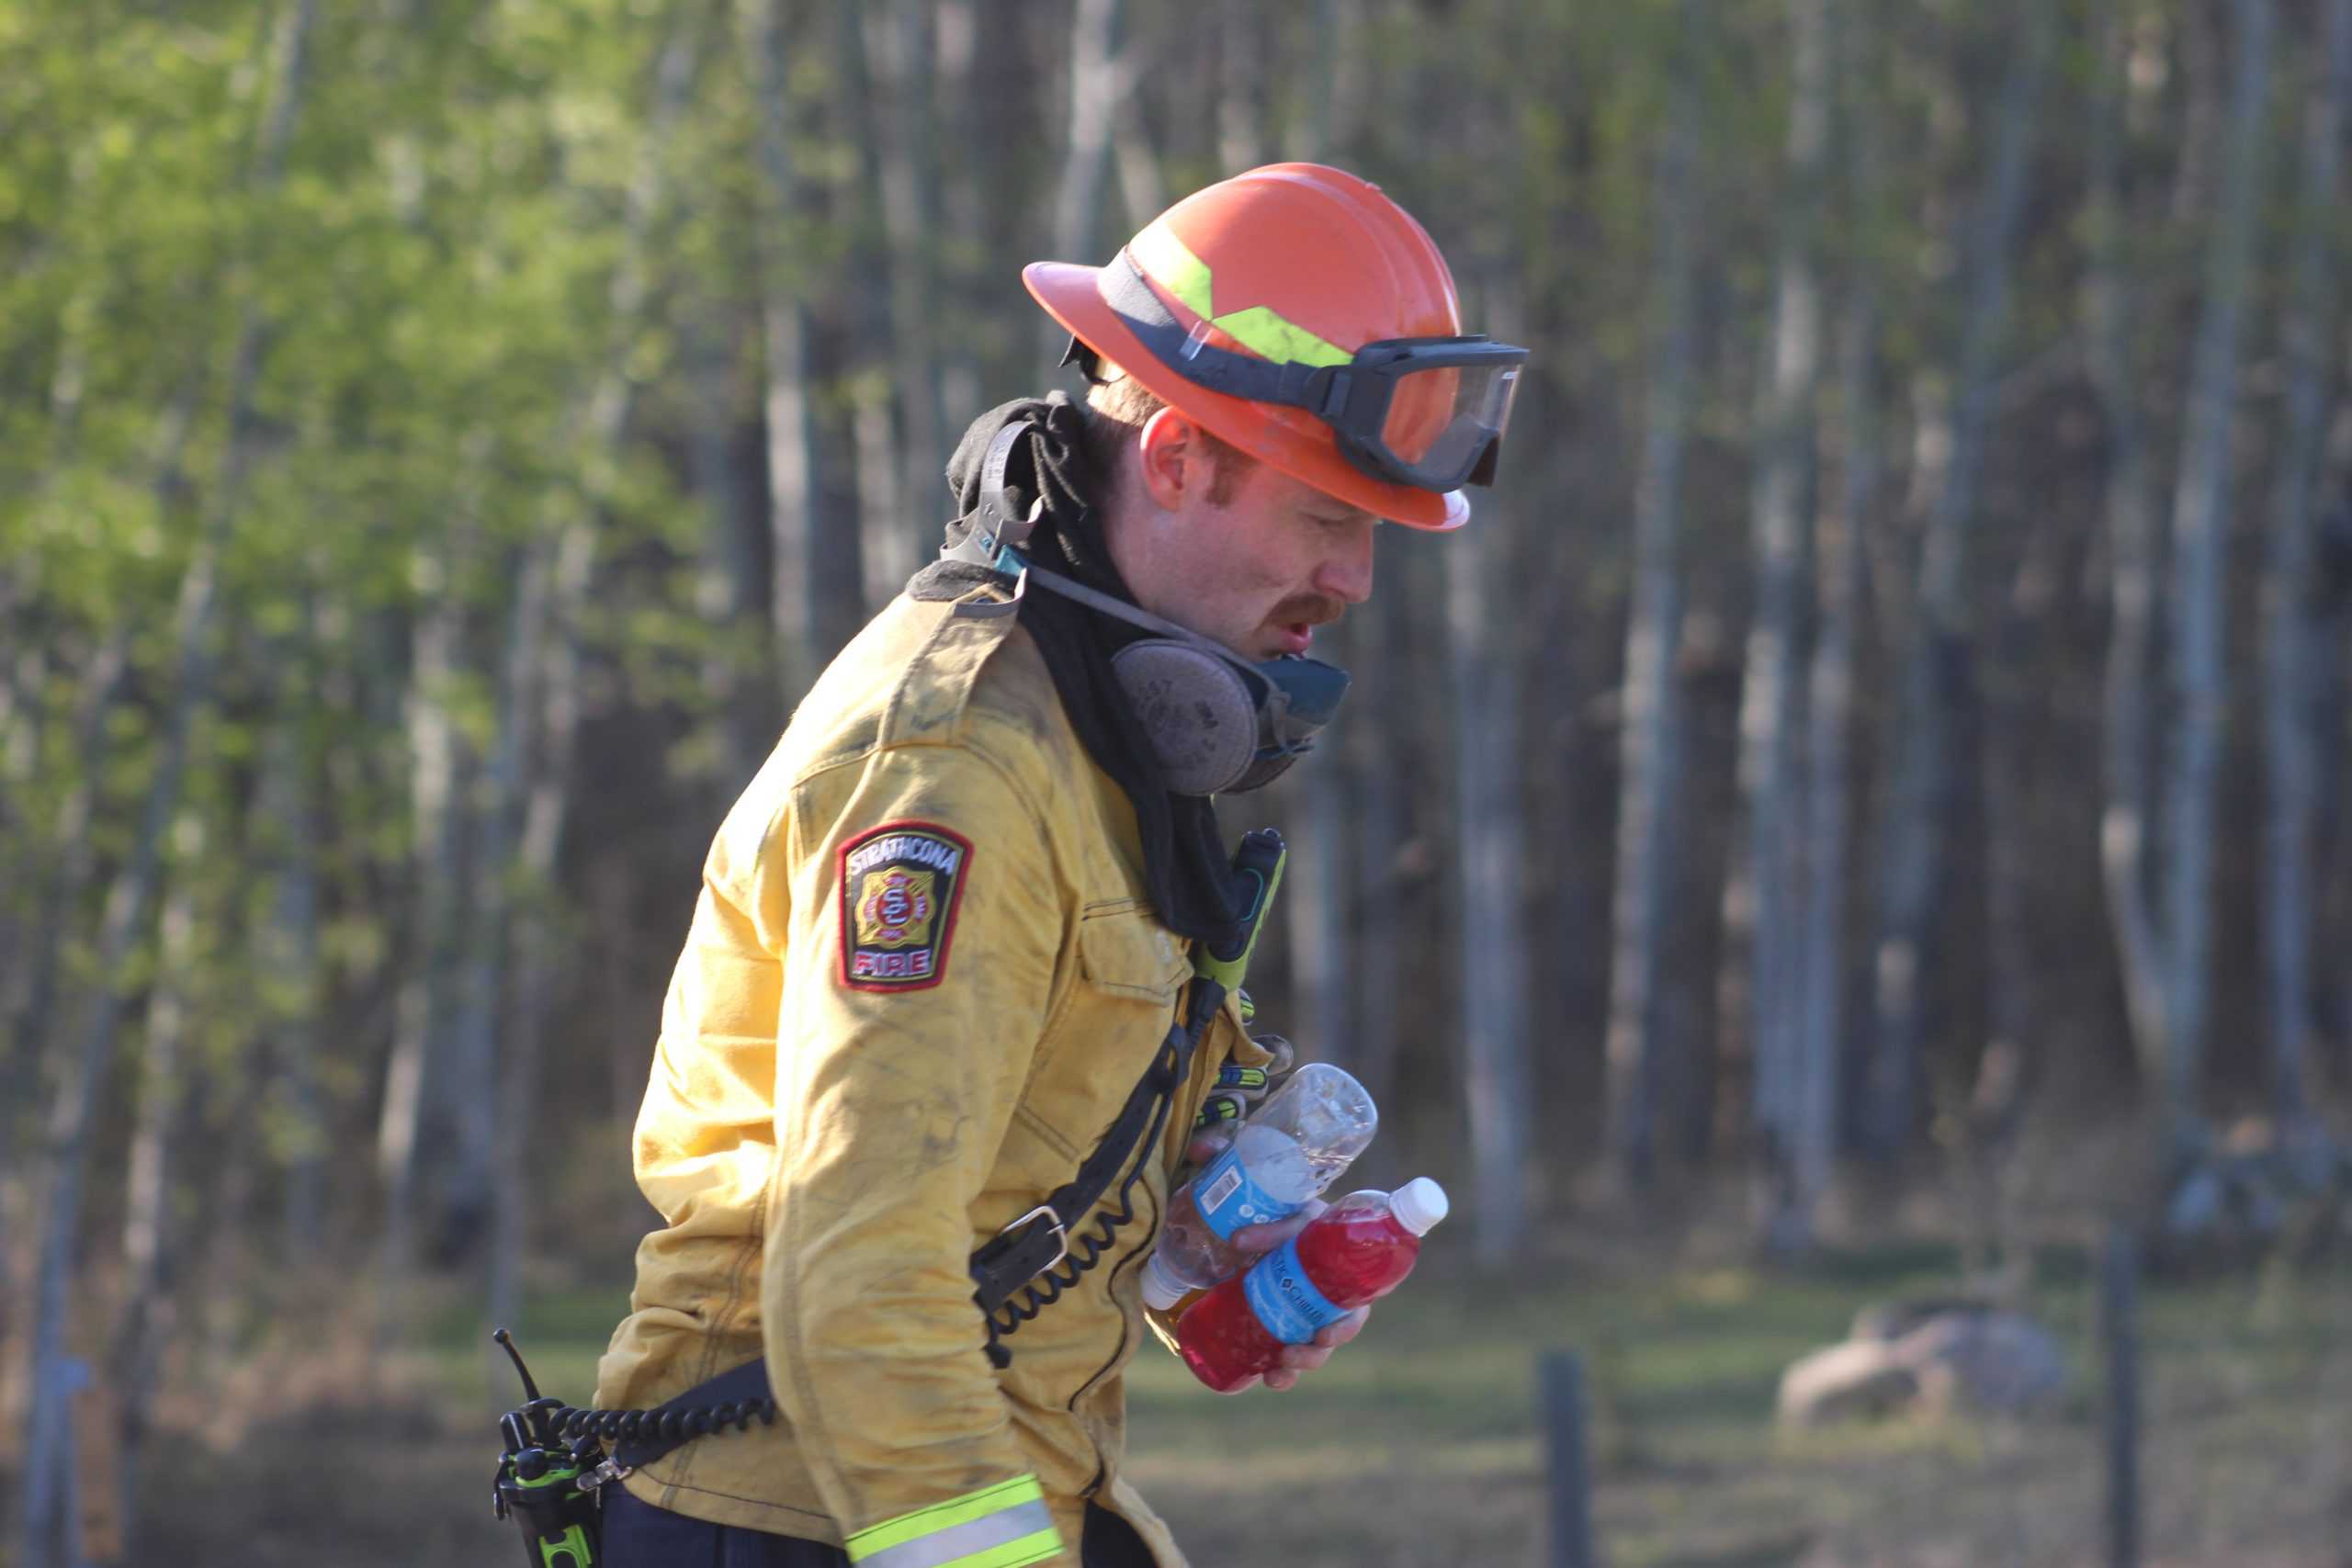 A Strathcona County Firefighter.